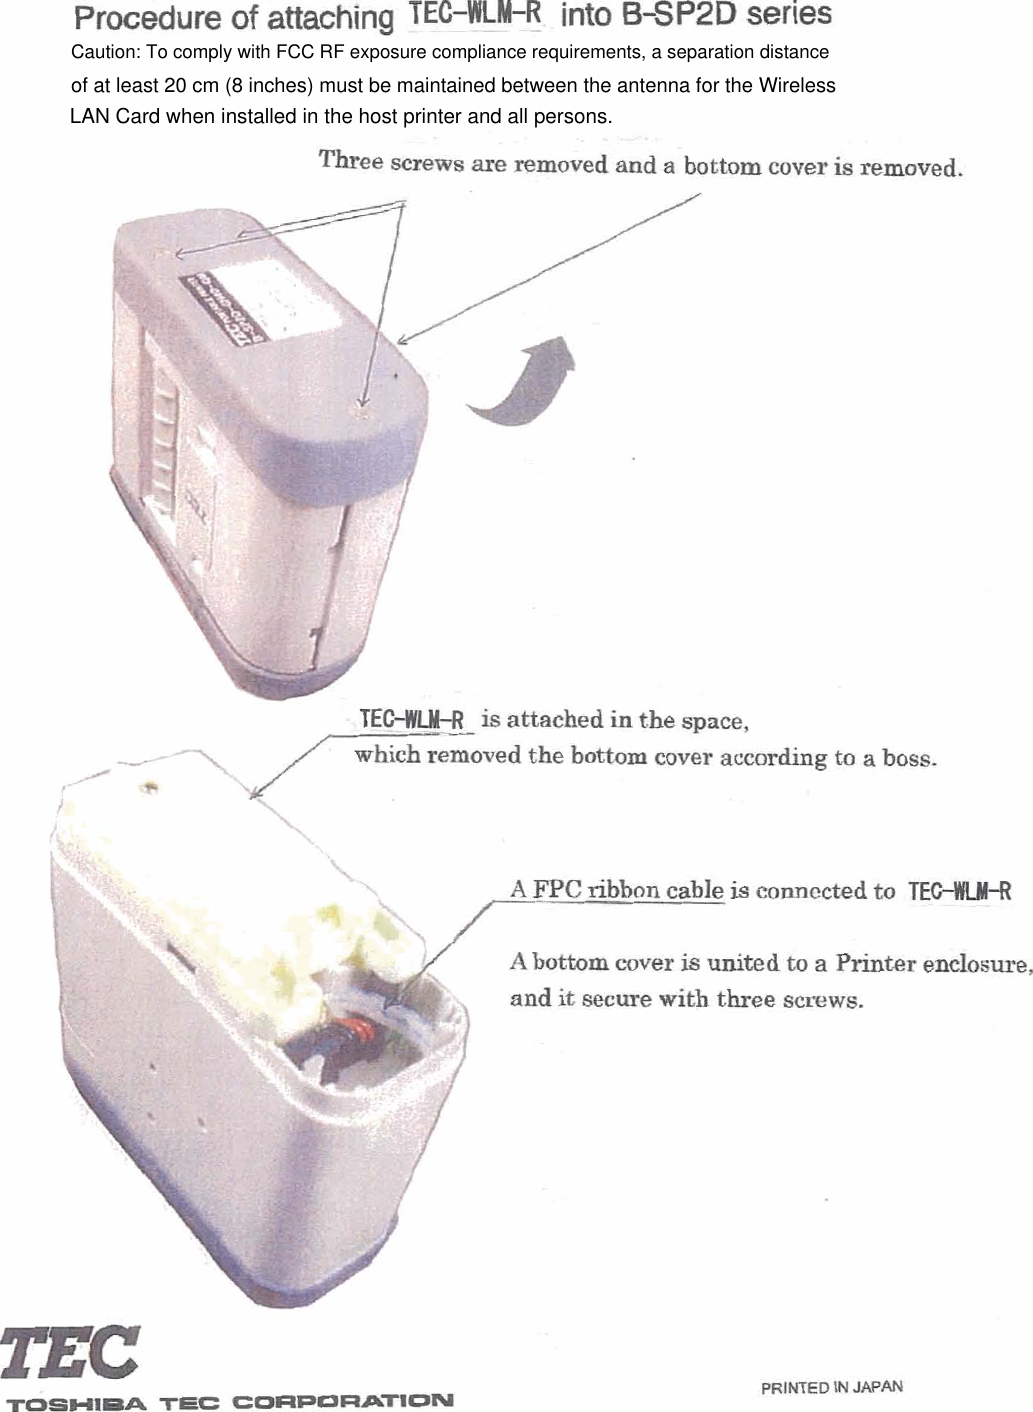 Procedure of attaching TEC-~ into B*P2D series . ---. Three are removed an$ a-bottom cover is remove&amp; TEHU-ft is attached in the space, the bottom cover according to a boss. TOOHIM TEC CORPORATlON A FPC ribbon cable is connected to TEGWLM-R - - - , A bottom cover is united to a Printer enclosure, and it secure with three smws. 1 LAN Card when installed in the host printer and all persons.Caution: To comply with FCC RF exposure compliance requirements, a separation distance of at least 20 cm (8 inches) must be maintained between the antenna for the Wireless